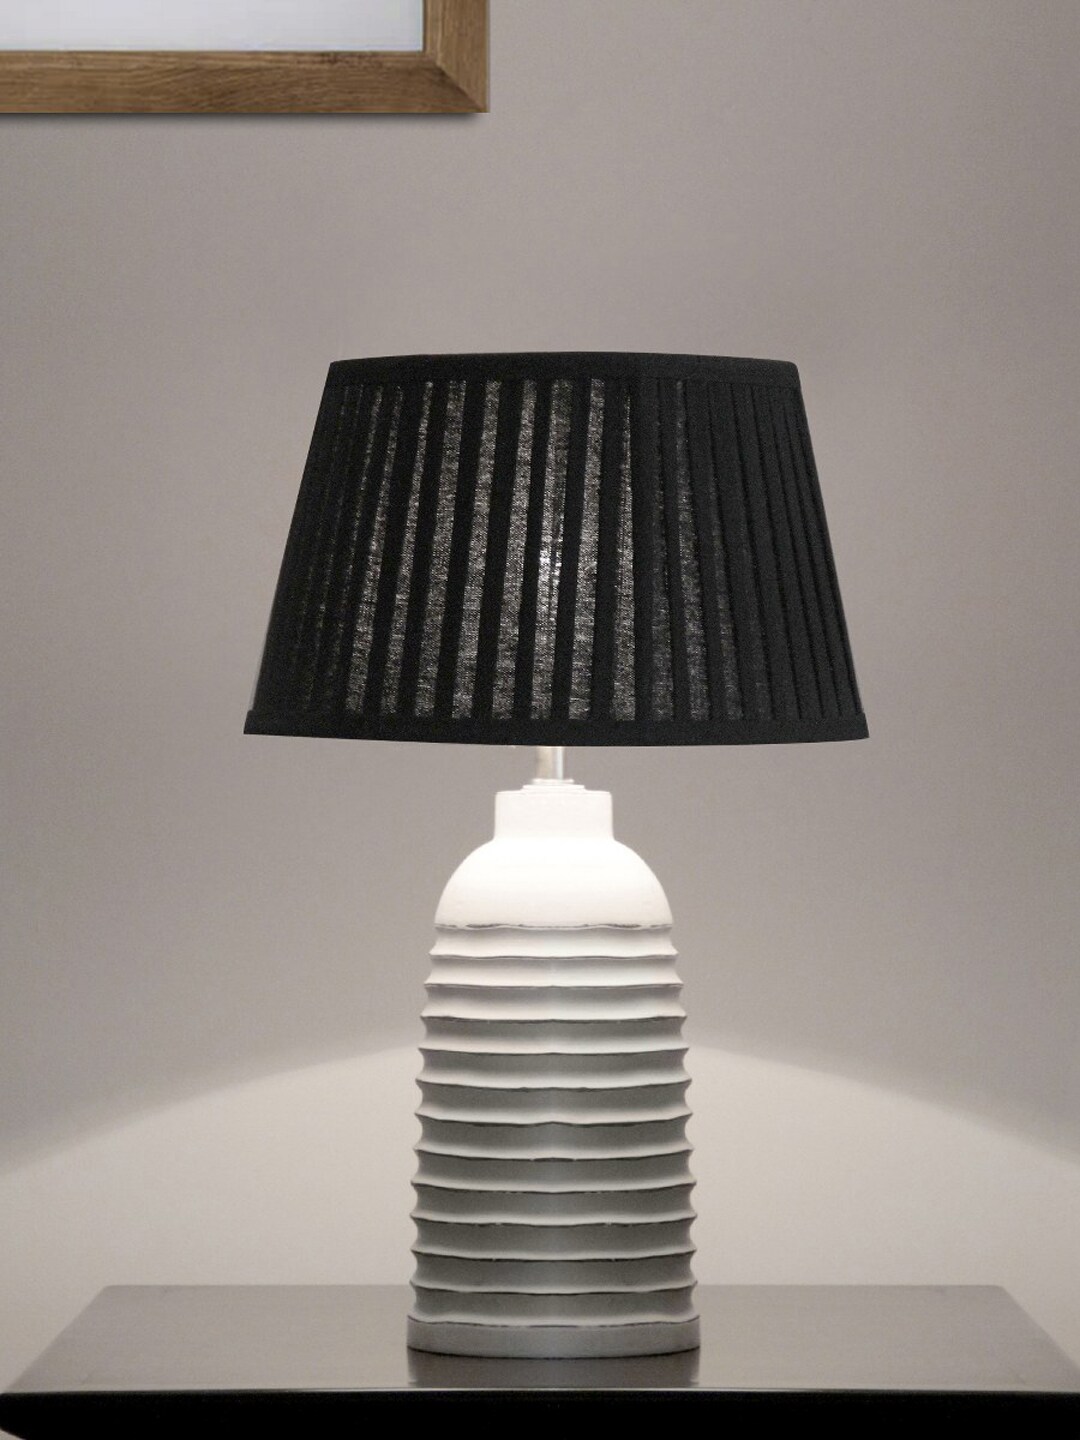 THE LIGHT STORE White & Black Printed Contemporary Bedside Standard Table Lamp with Shade Price in India